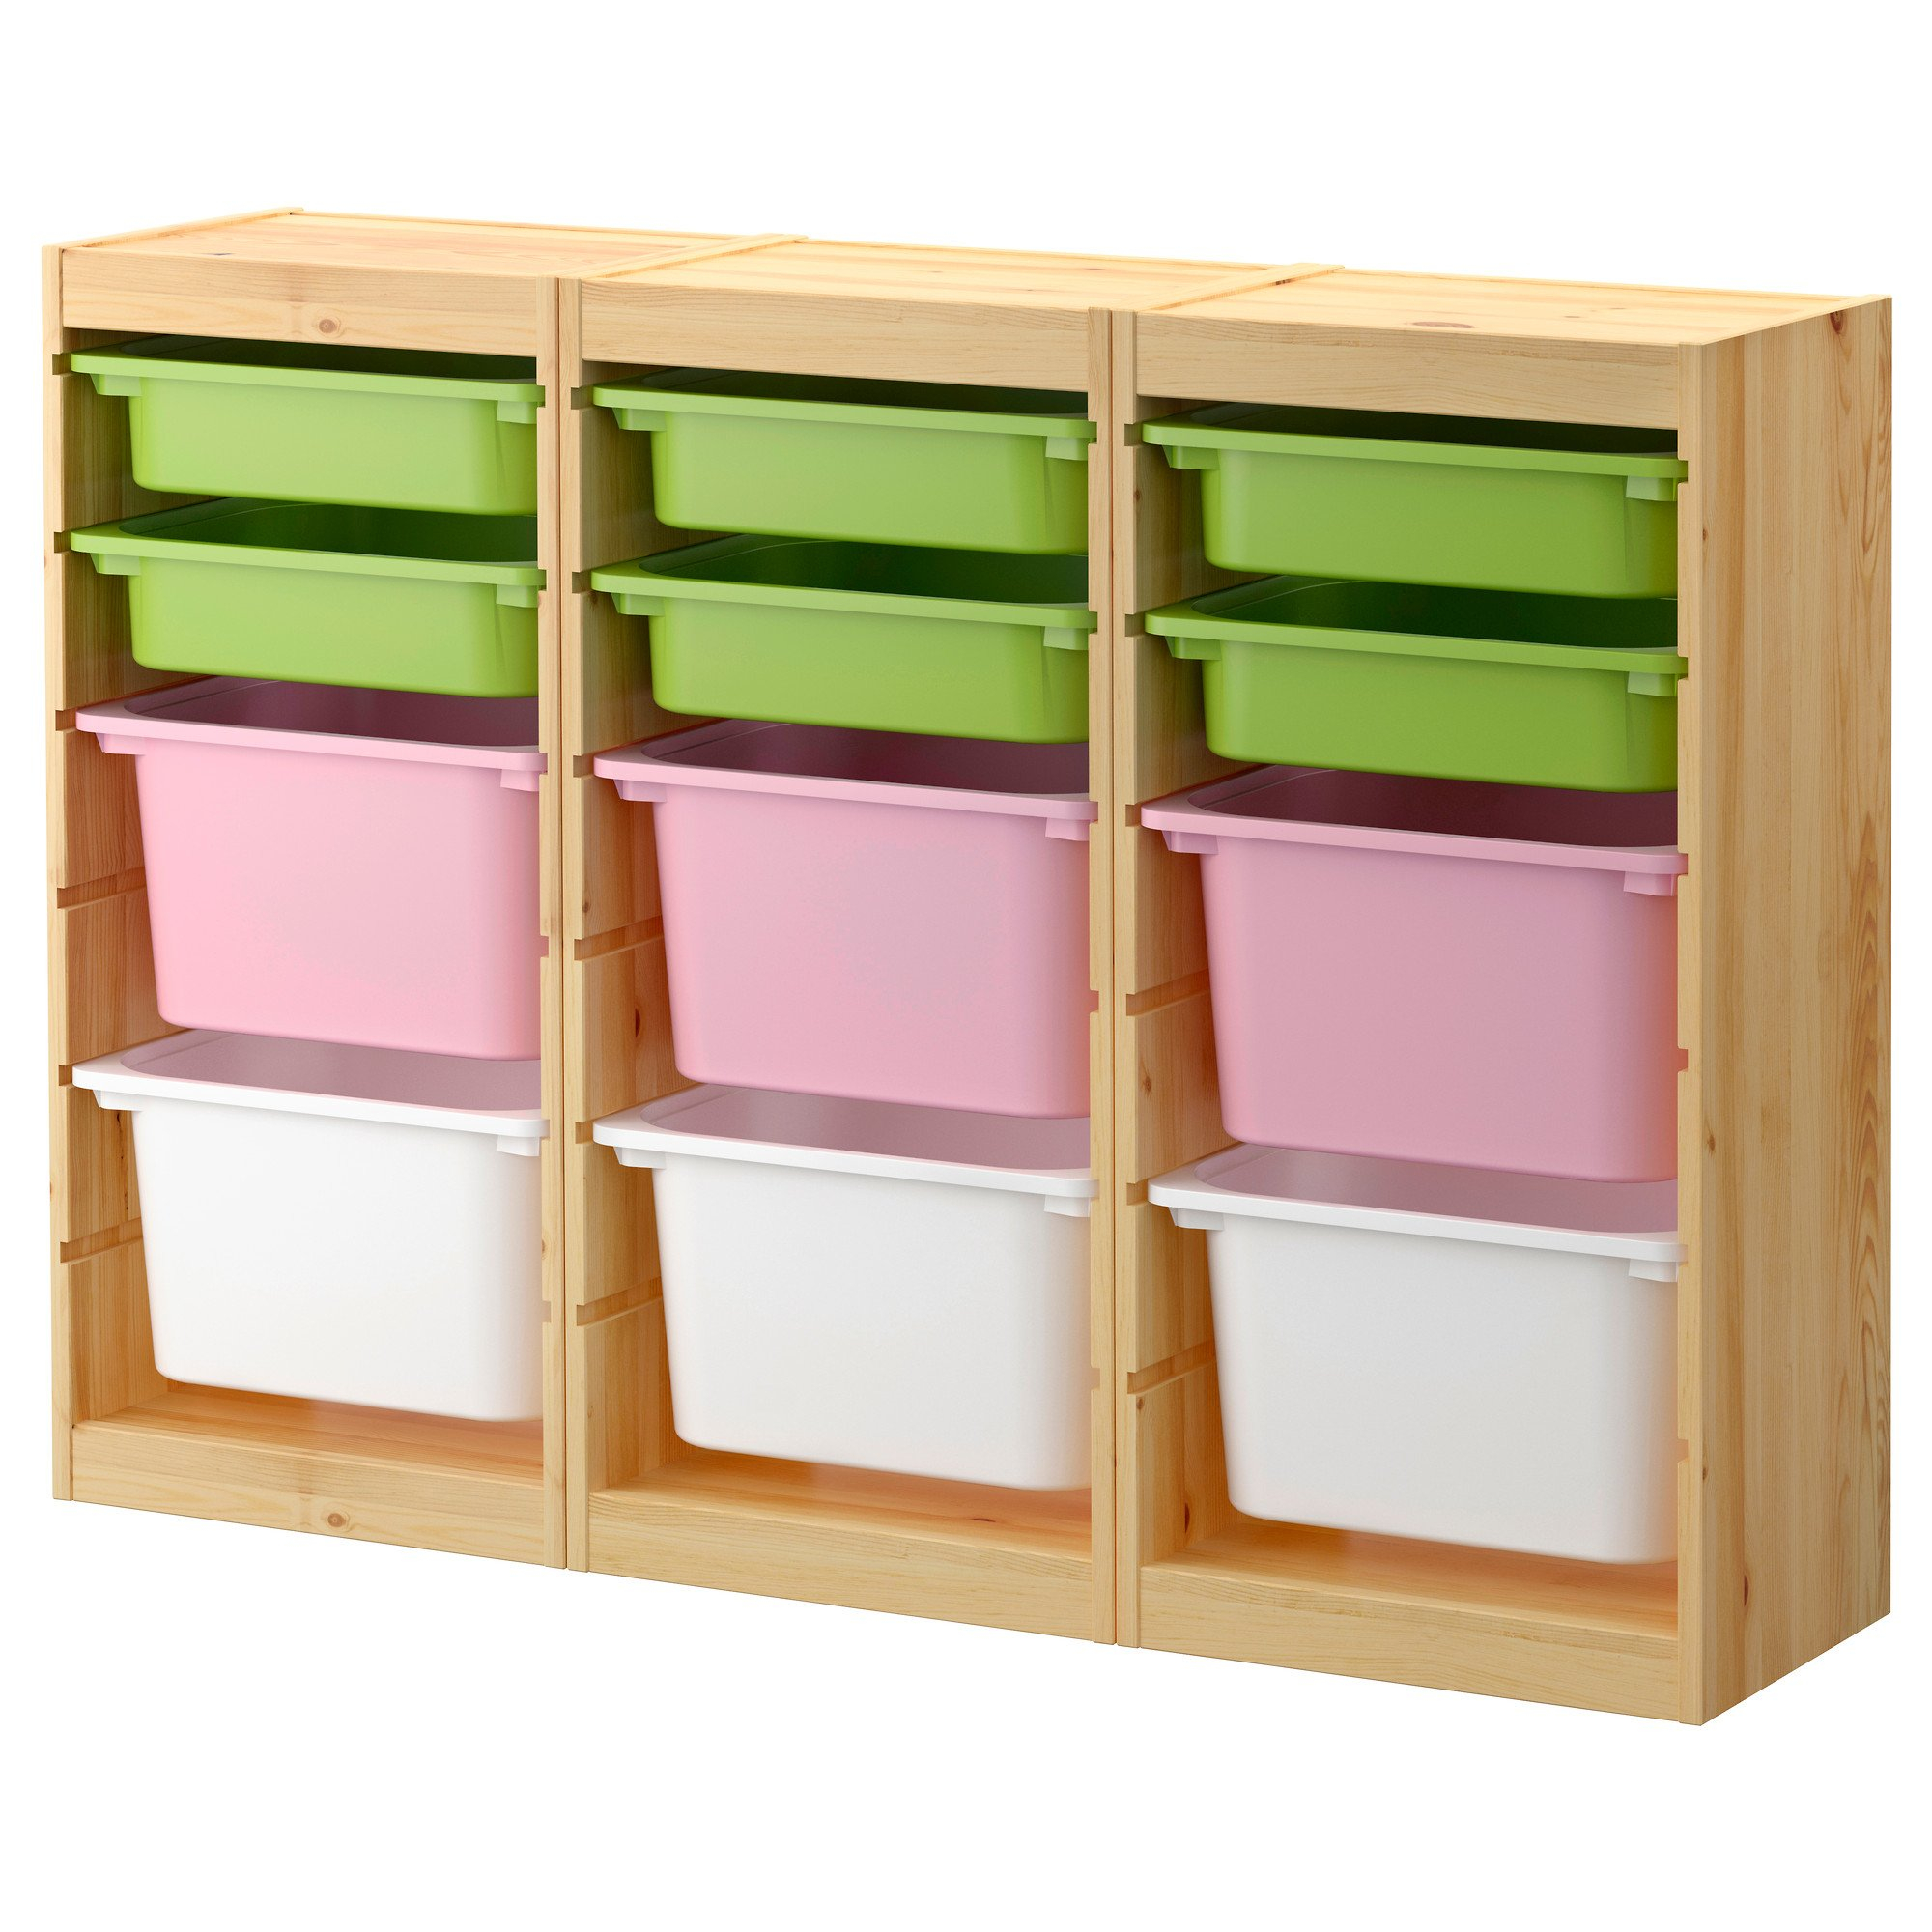 Wooden Storage Shelves With Bins Home Decorations Innovative inside size 2000 X 2000